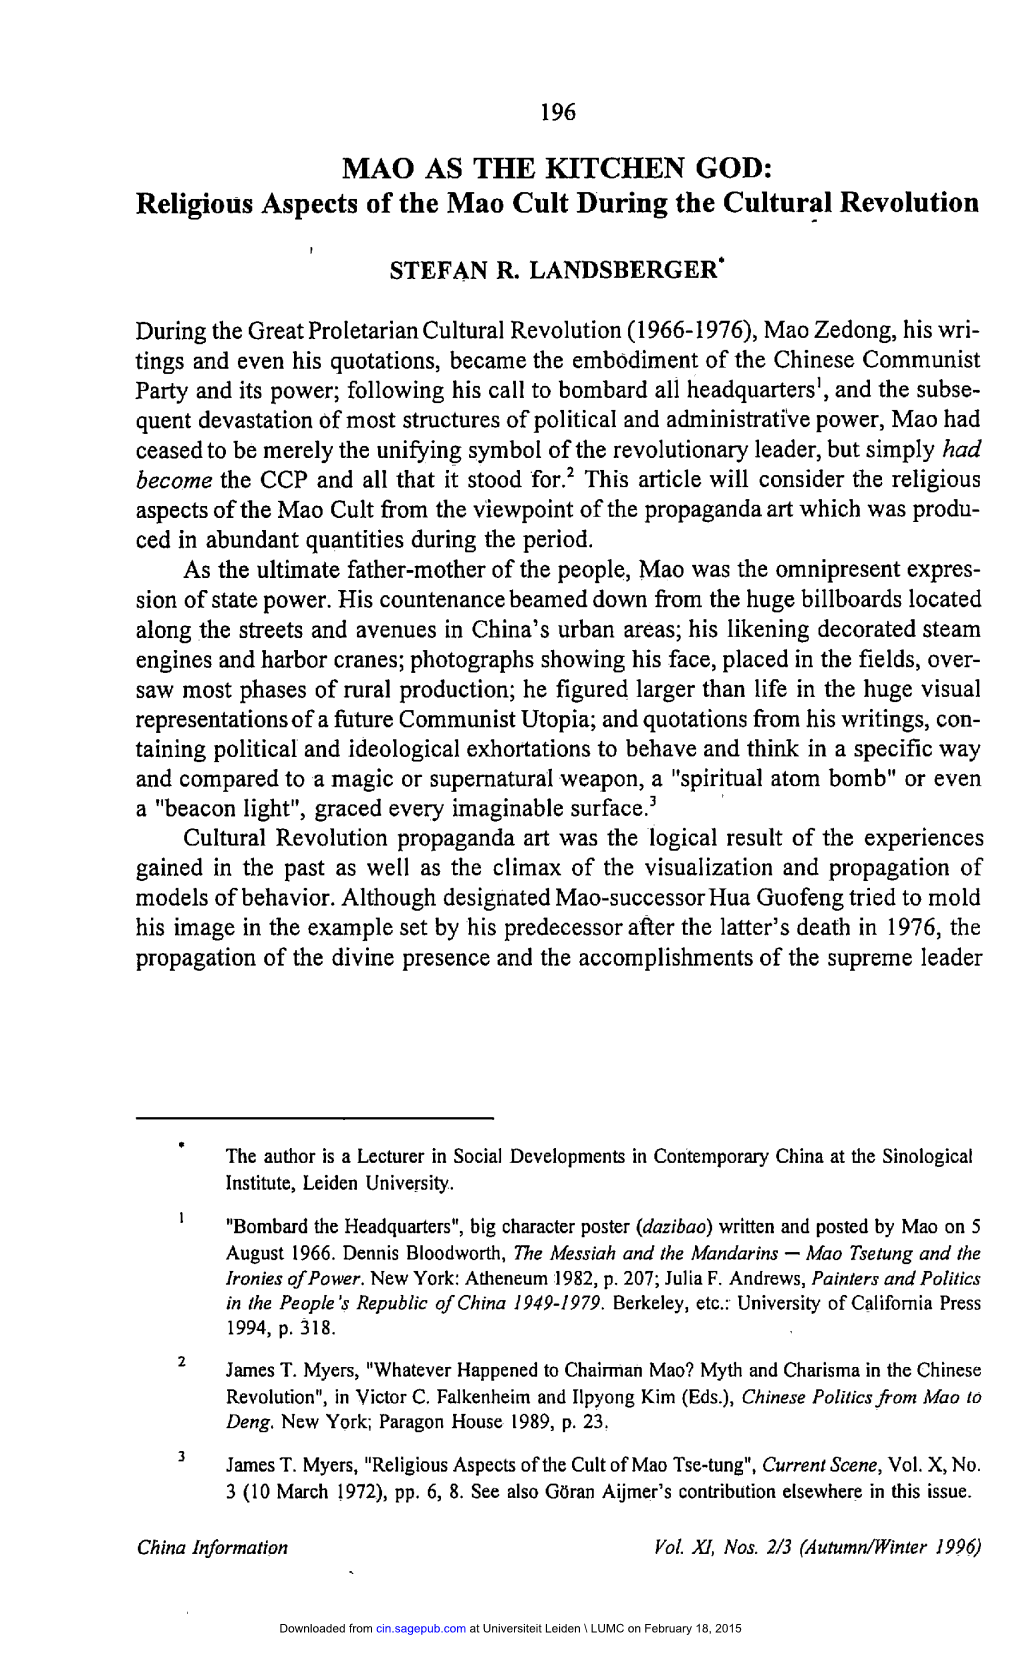 MAO AS the KITCHEN GOD: Religious Aspects of the Mao Cult During the Cultural Revolution